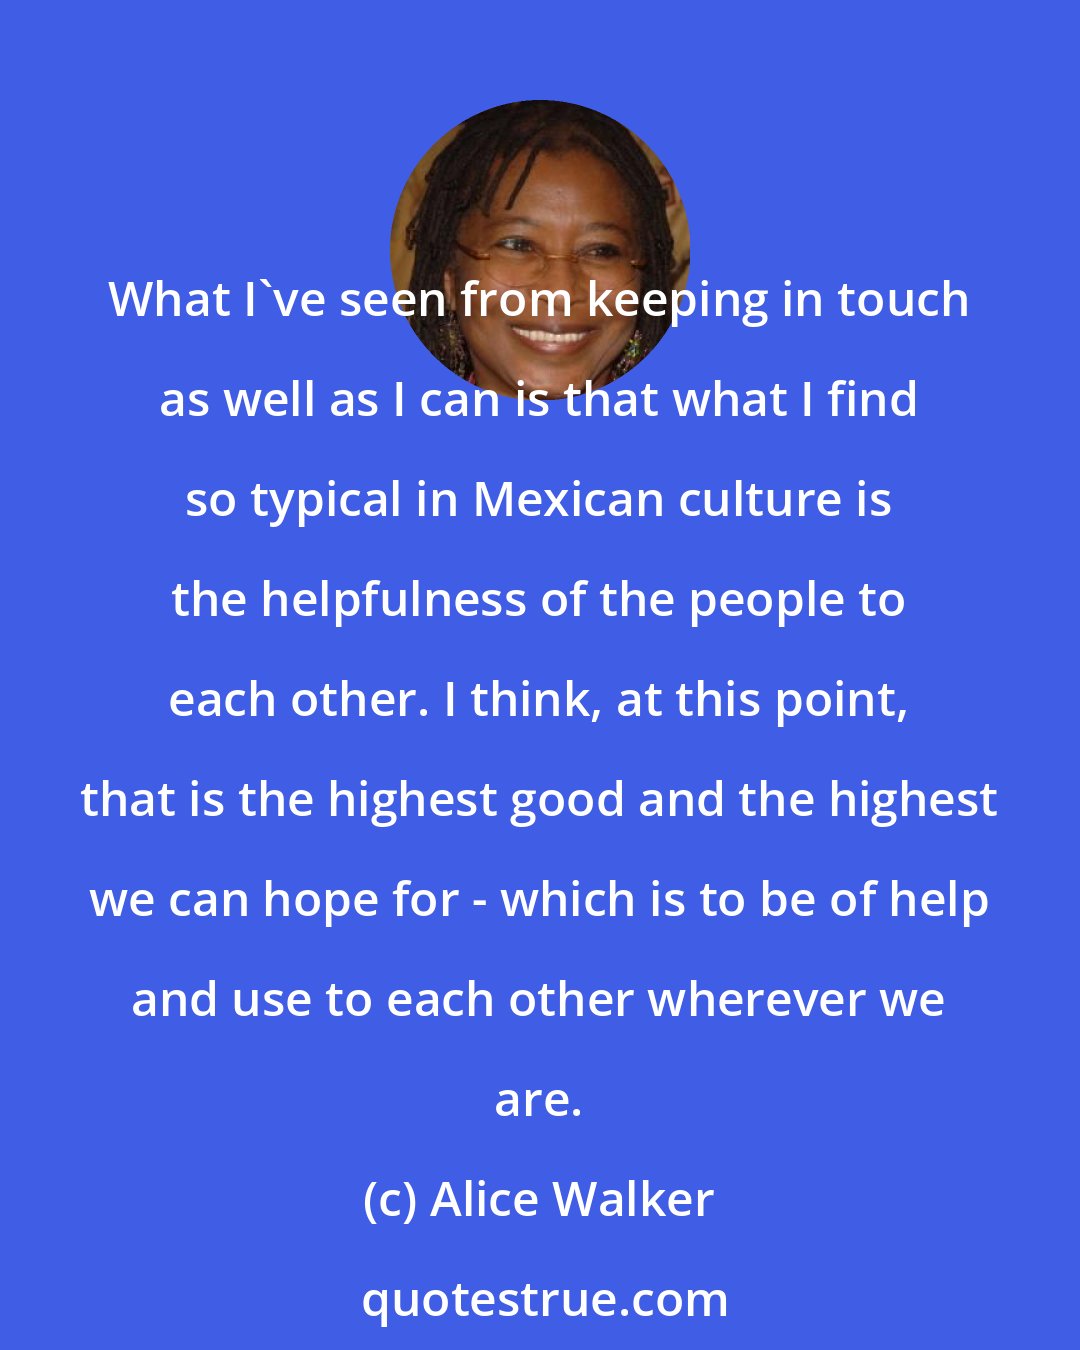 Alice Walker: What I've seen from keeping in touch as well as I can is that what I find so typical in Mexican culture is the helpfulness of the people to each other. I think, at this point, that is the highest good and the highest we can hope for - which is to be of help and use to each other wherever we are.